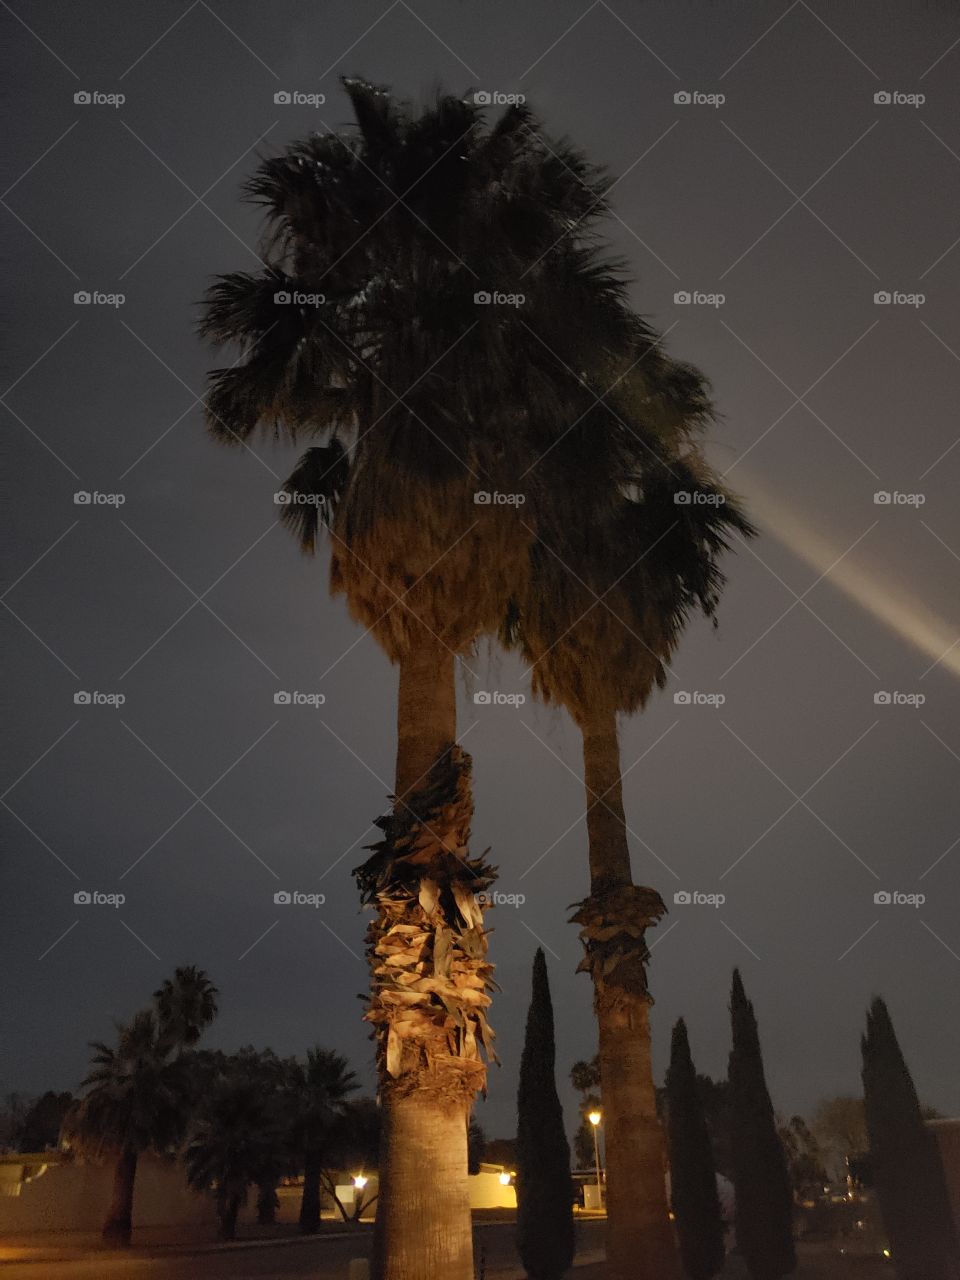 palm trees lit up with the moon light